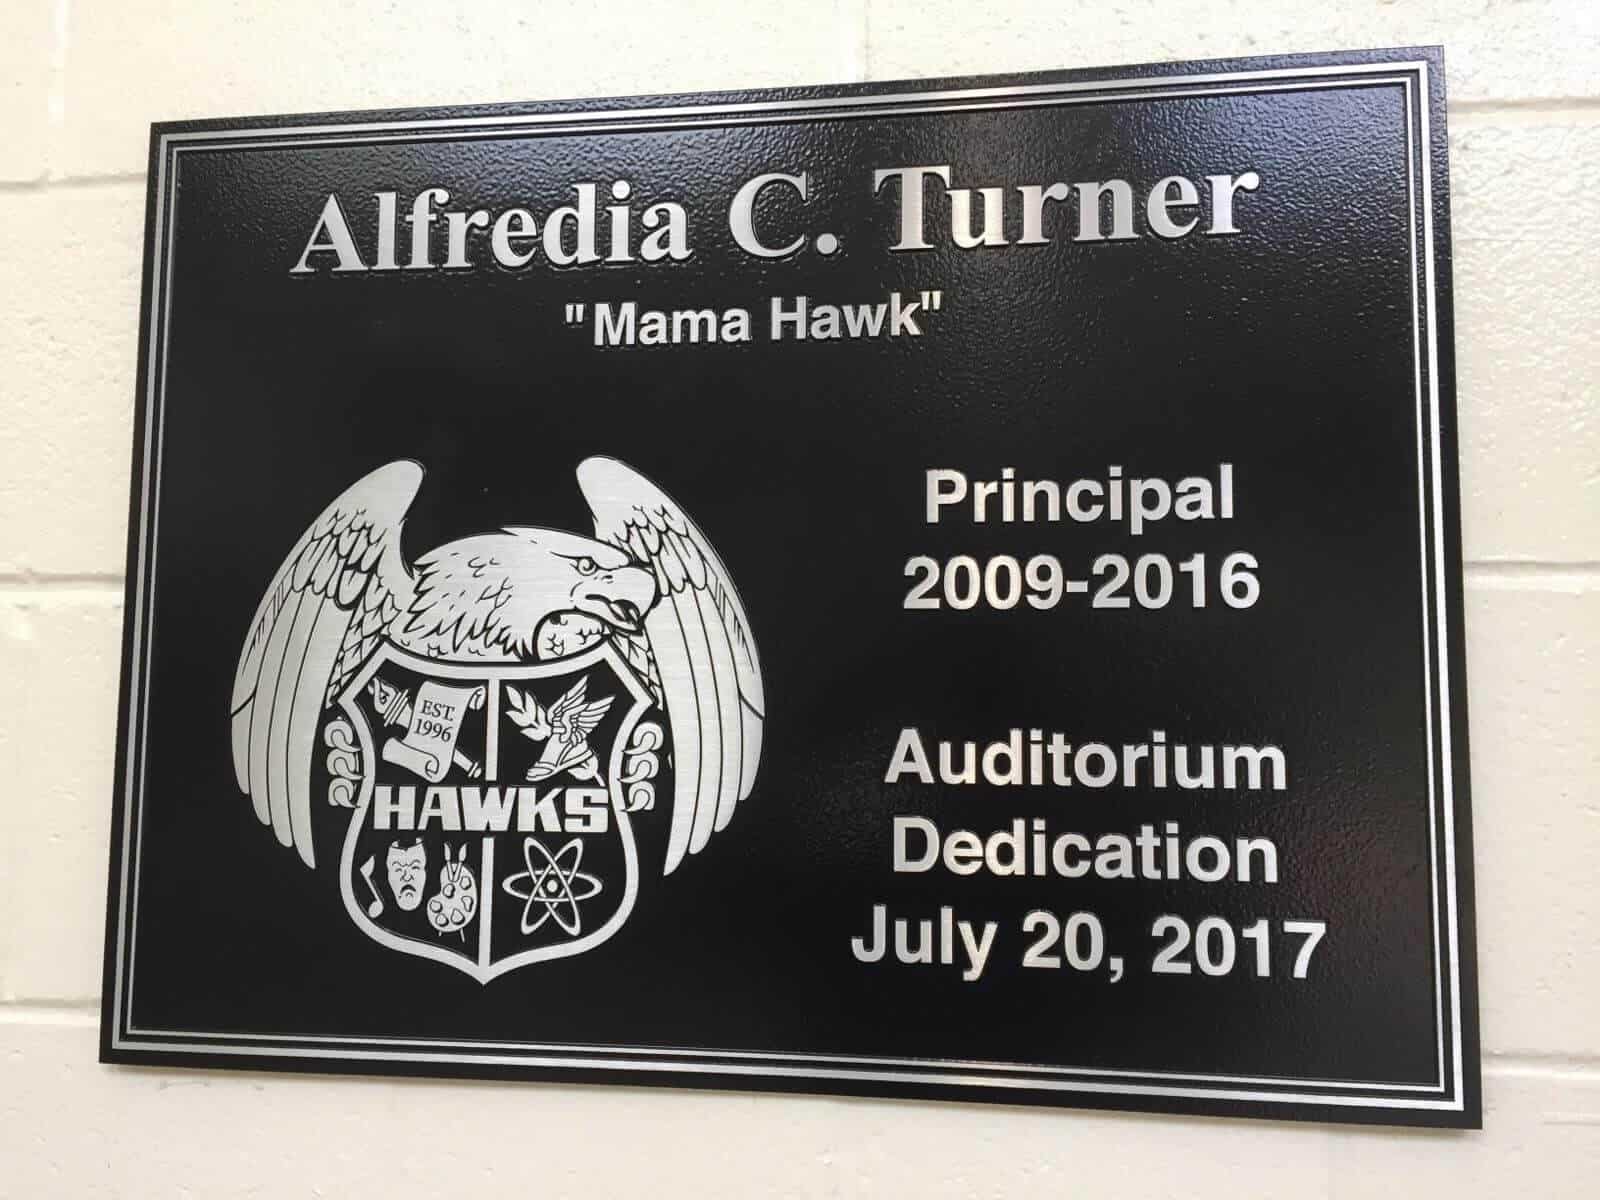 Engraved sign, Engraved plaque sign on wall for Alfredia C. Turner